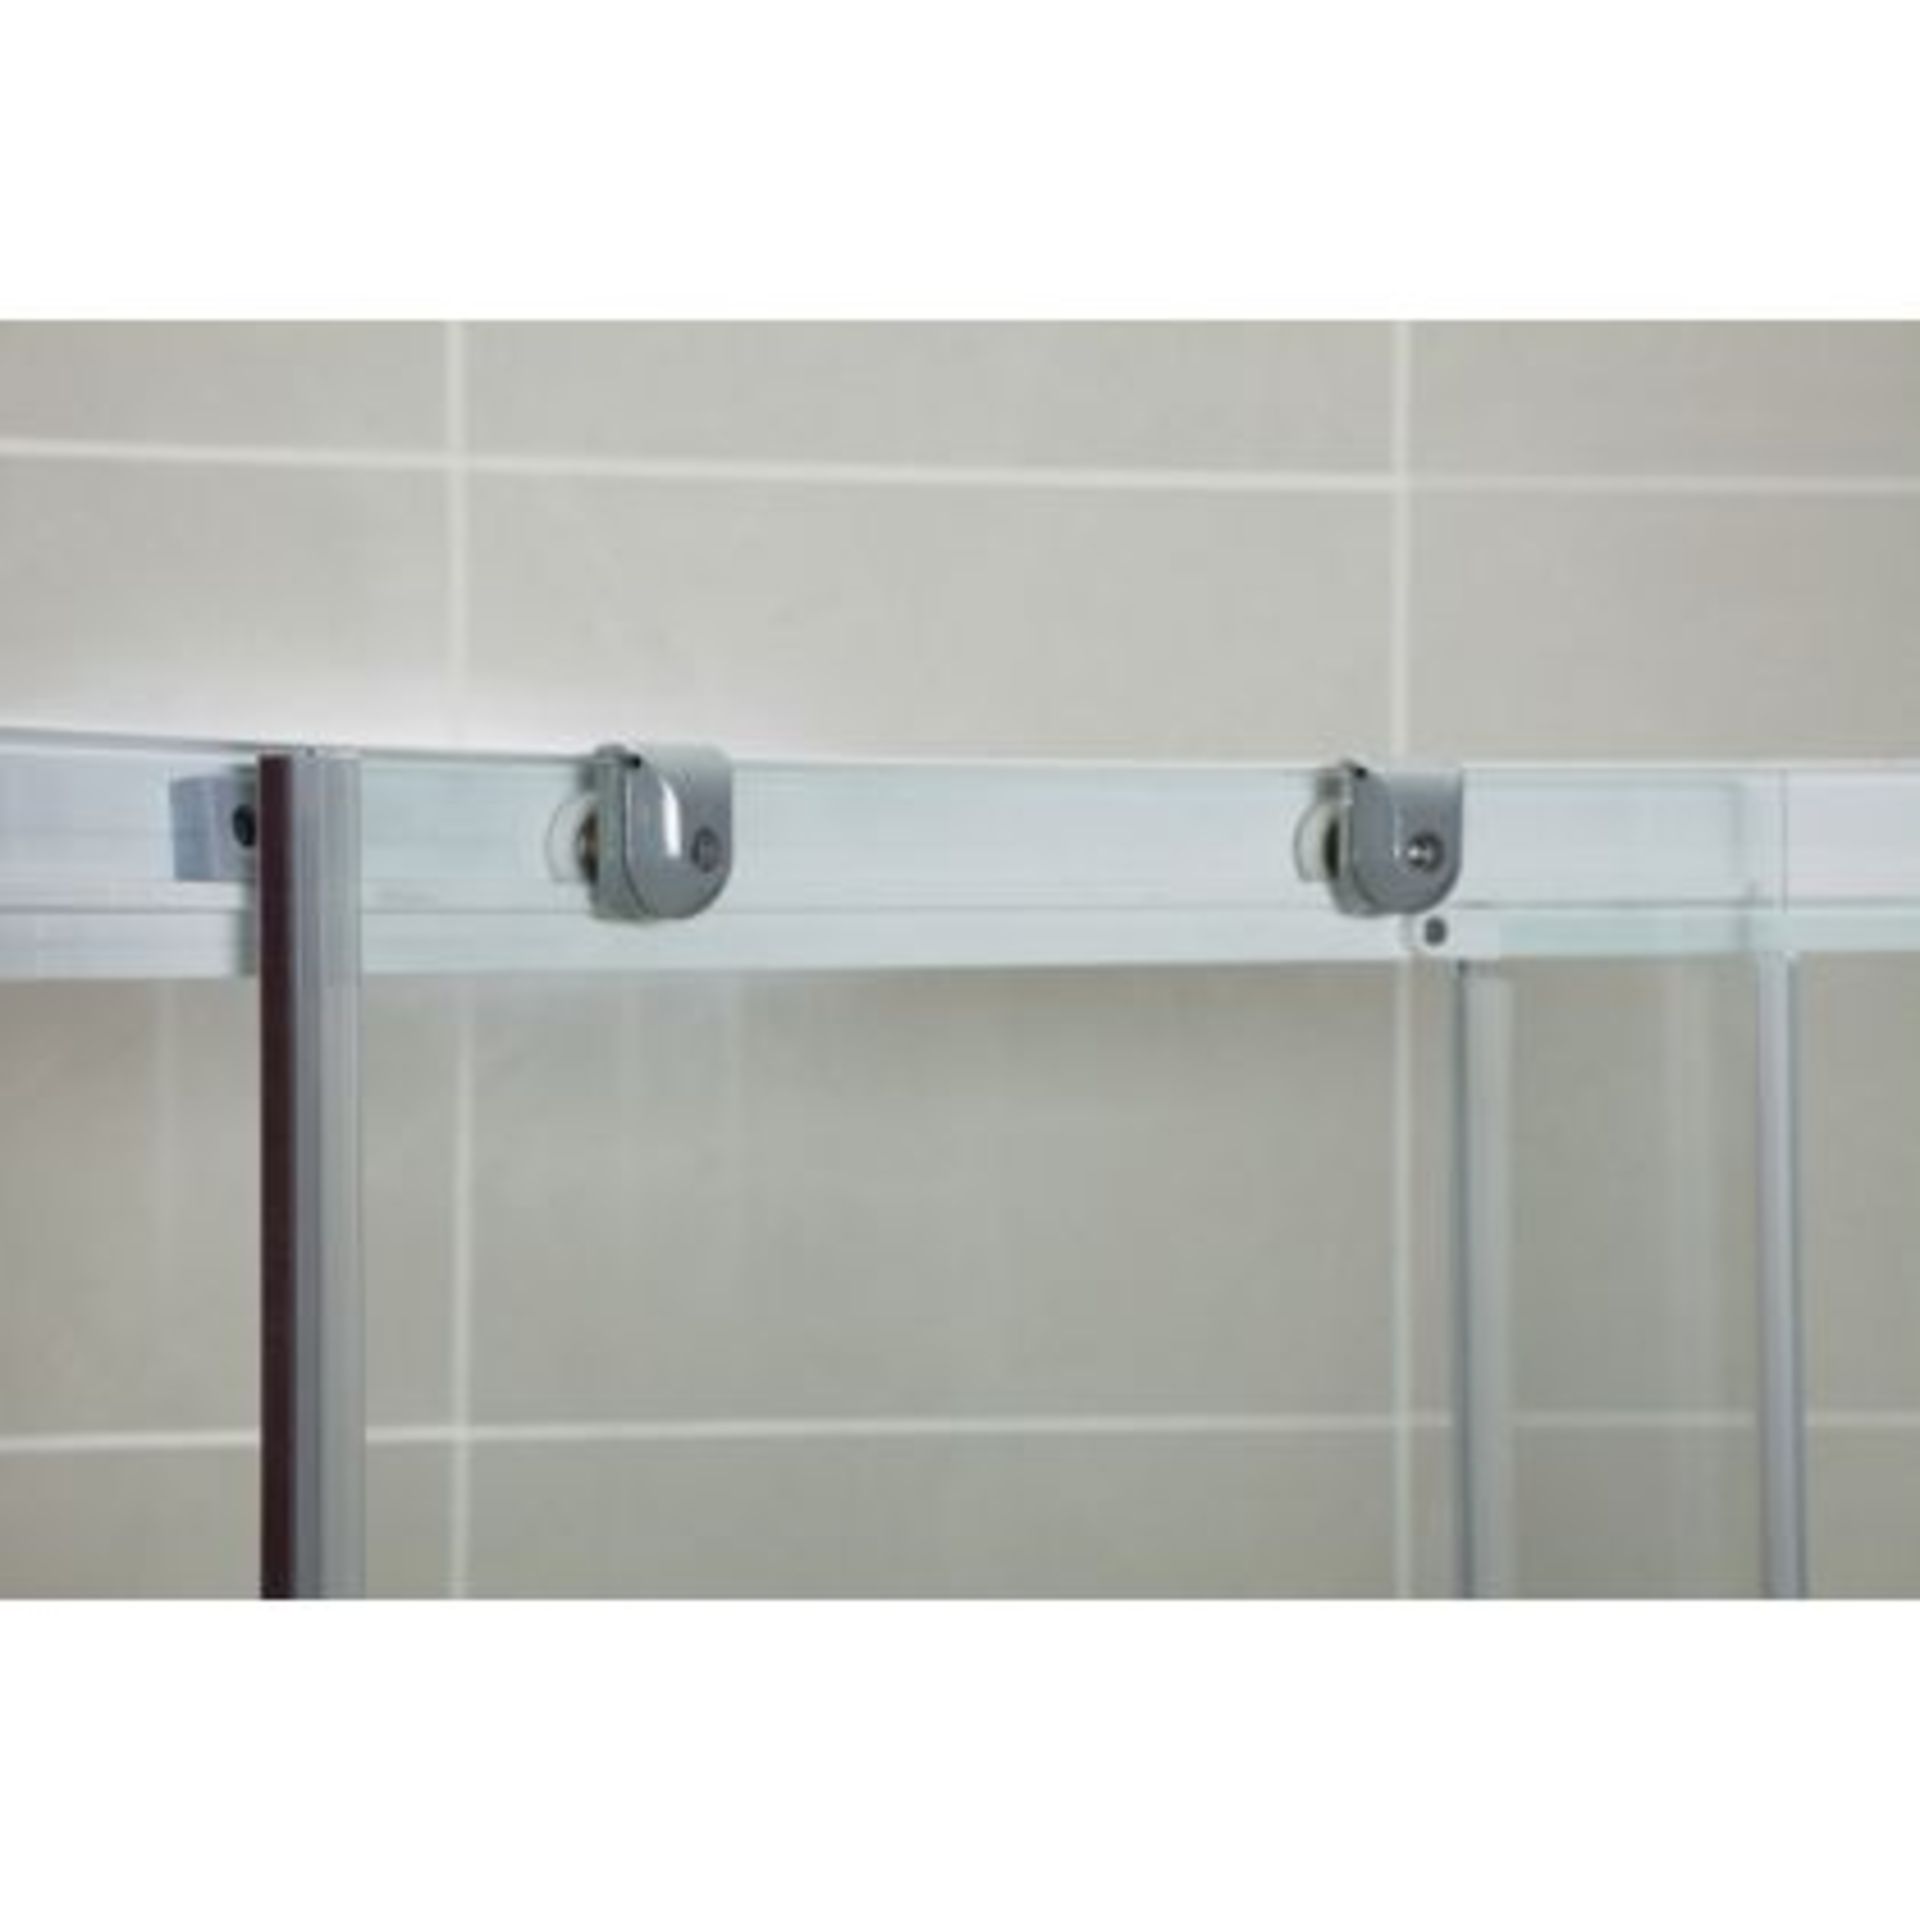 (AAA145) Aqualux Crystal Slider Recess Shower Enclosure - 1000mm. RRP £238.99. Brand New & Sealed. - Image 2 of 3